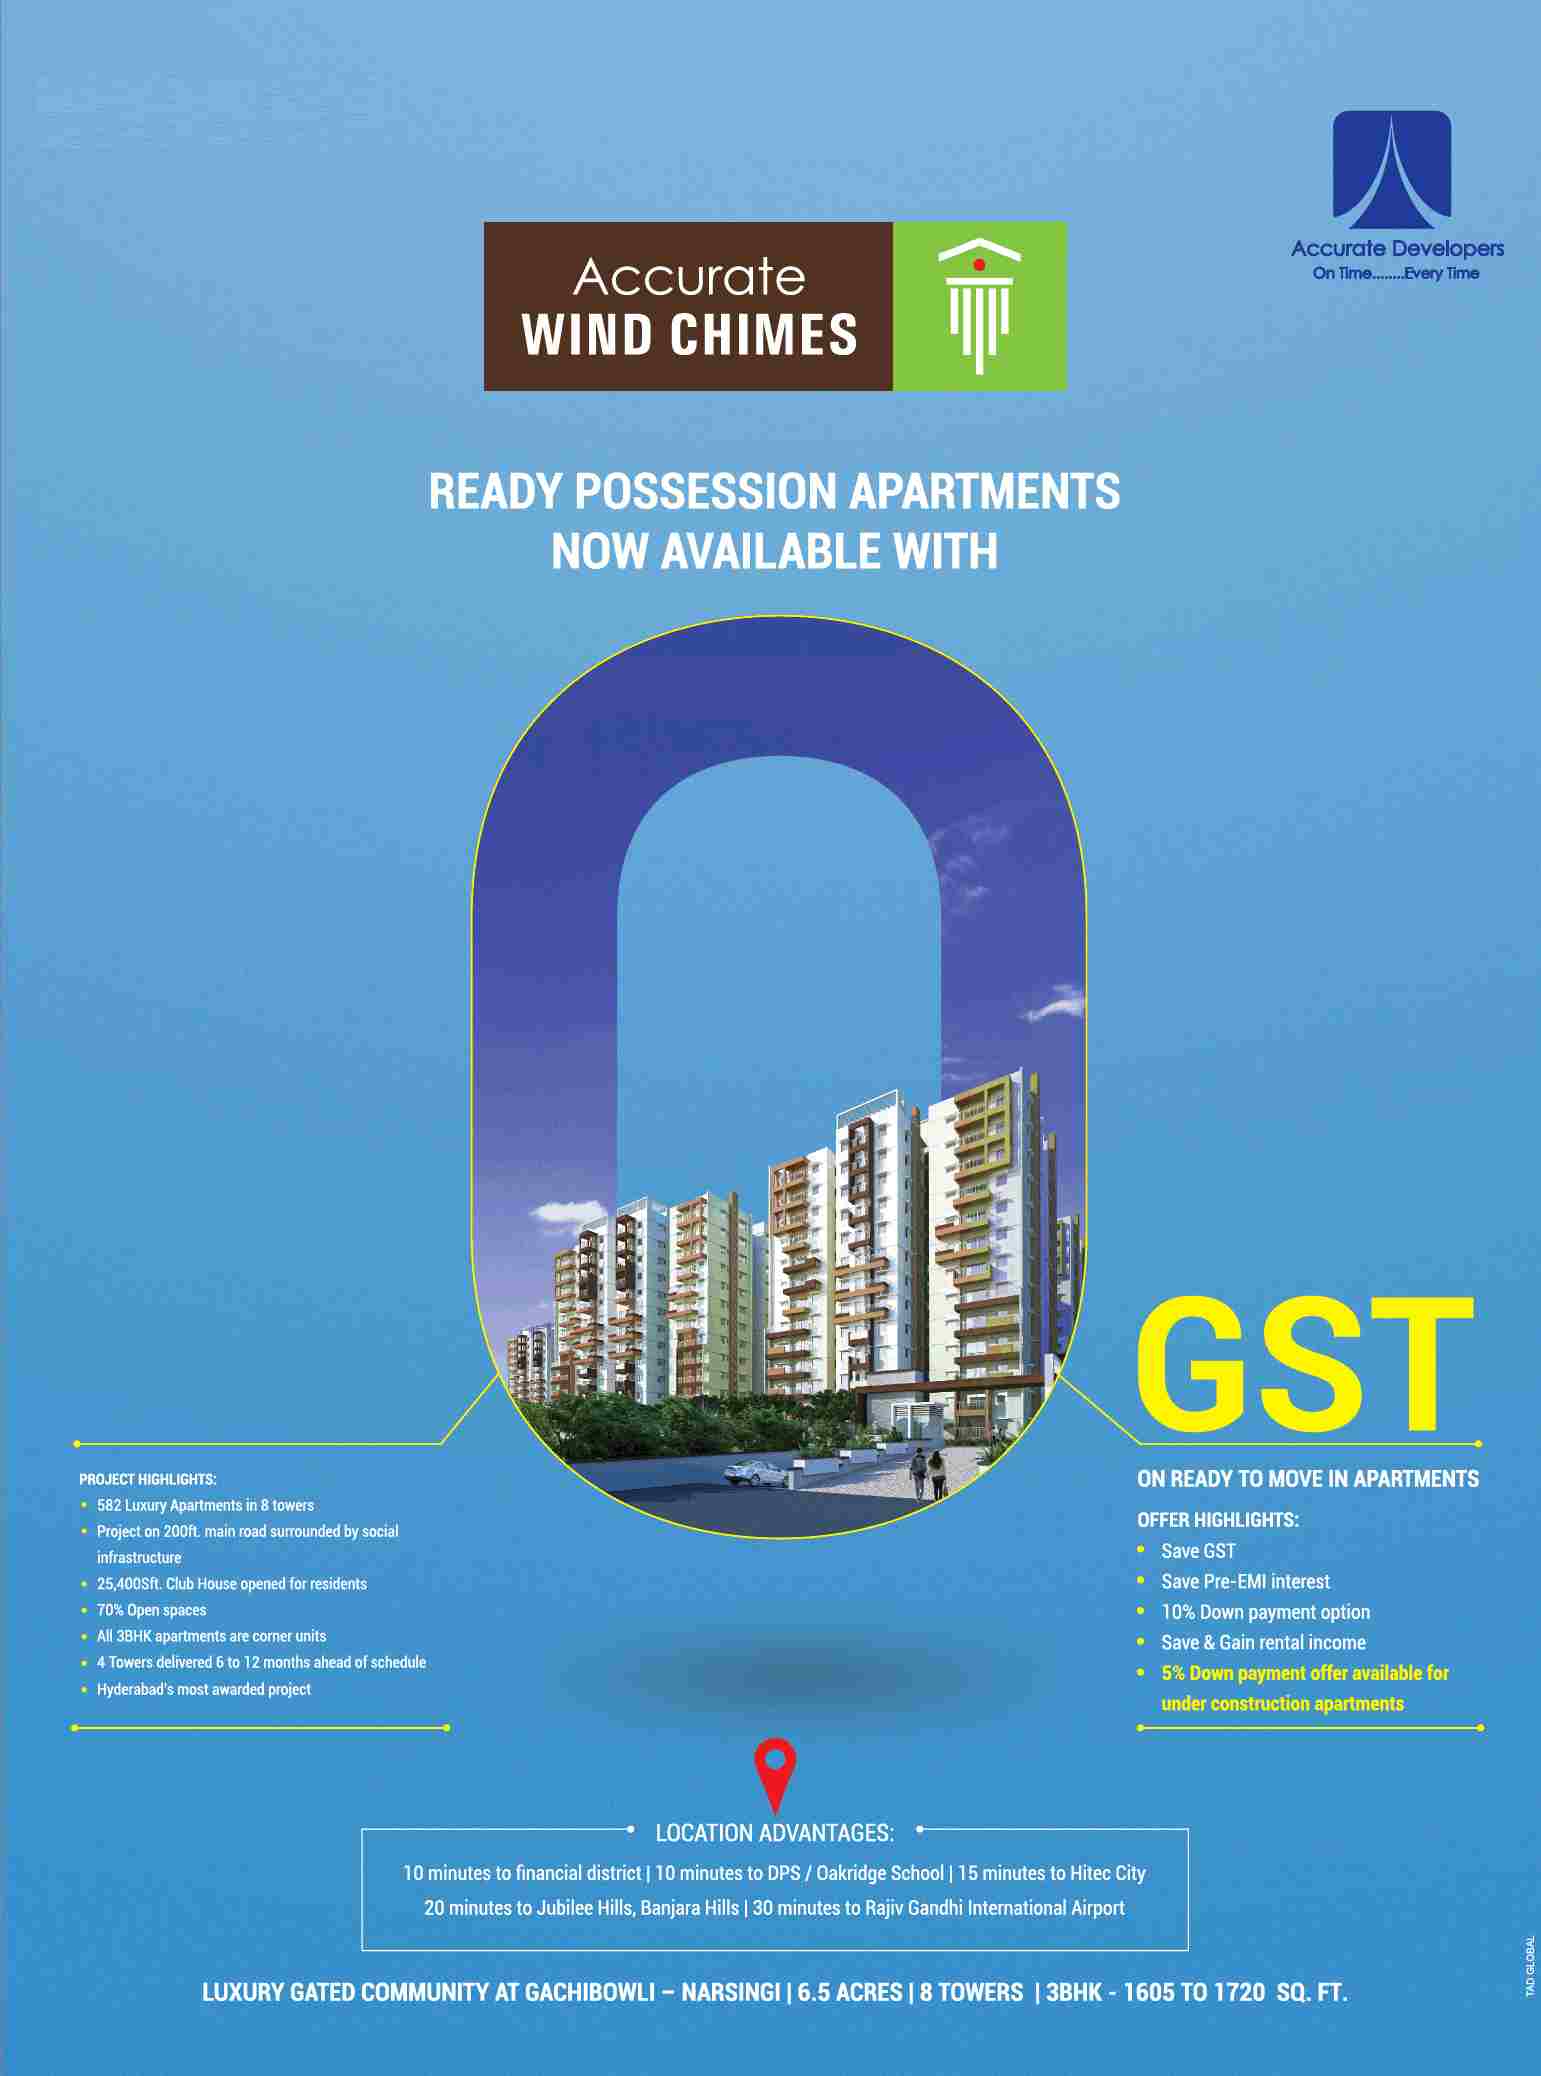 Book ready possession apartments with Zero GST at Accurate Wind Chimes in Hyderabad Update